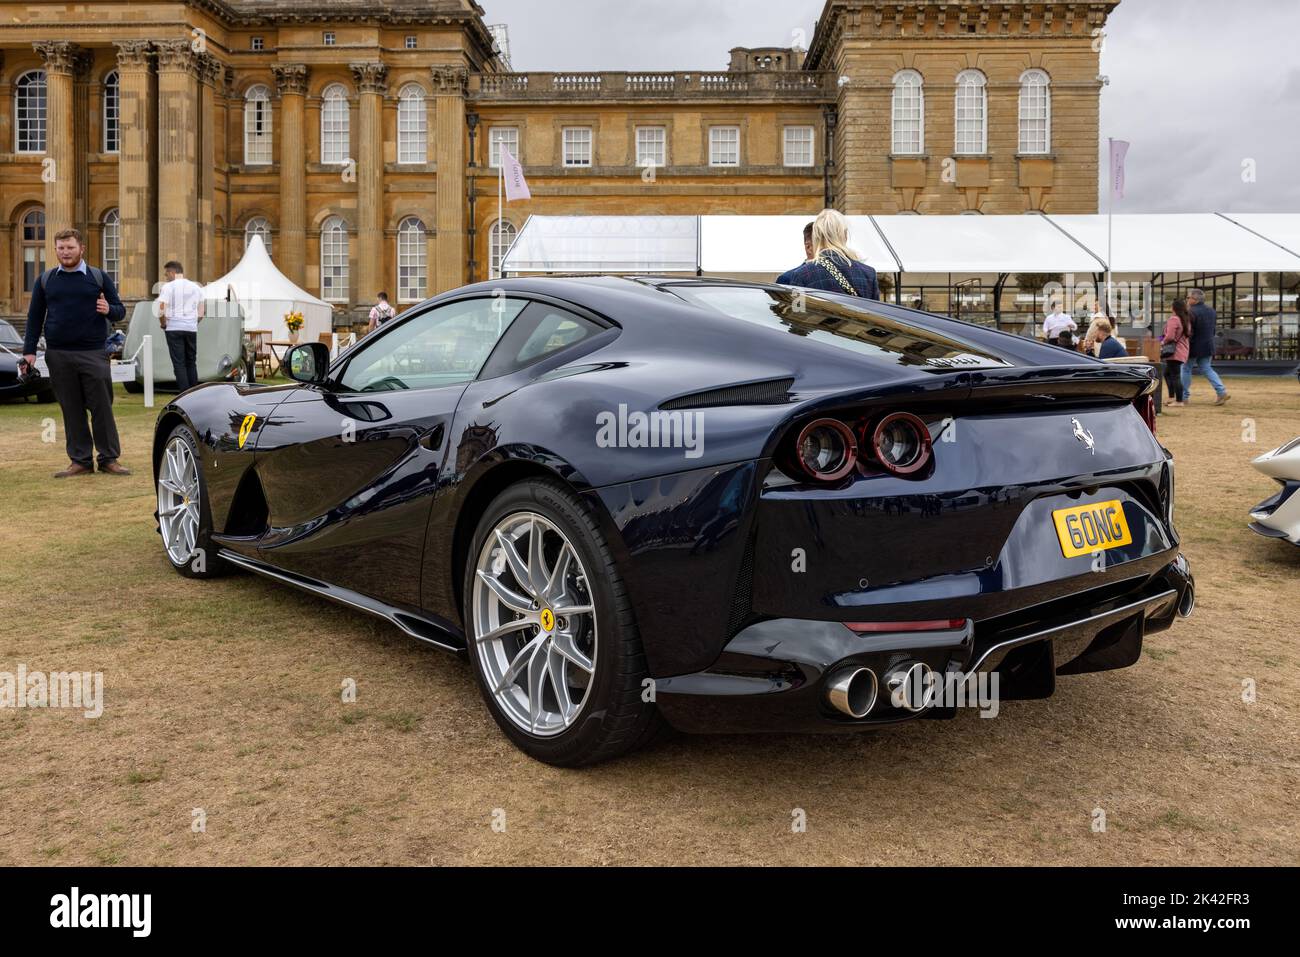 Ferrari 812 Superfast ‘6 ONG’ on display at the Salon Privé Concours d’Elégance motor show held at Blenheim Palace Stock Photo